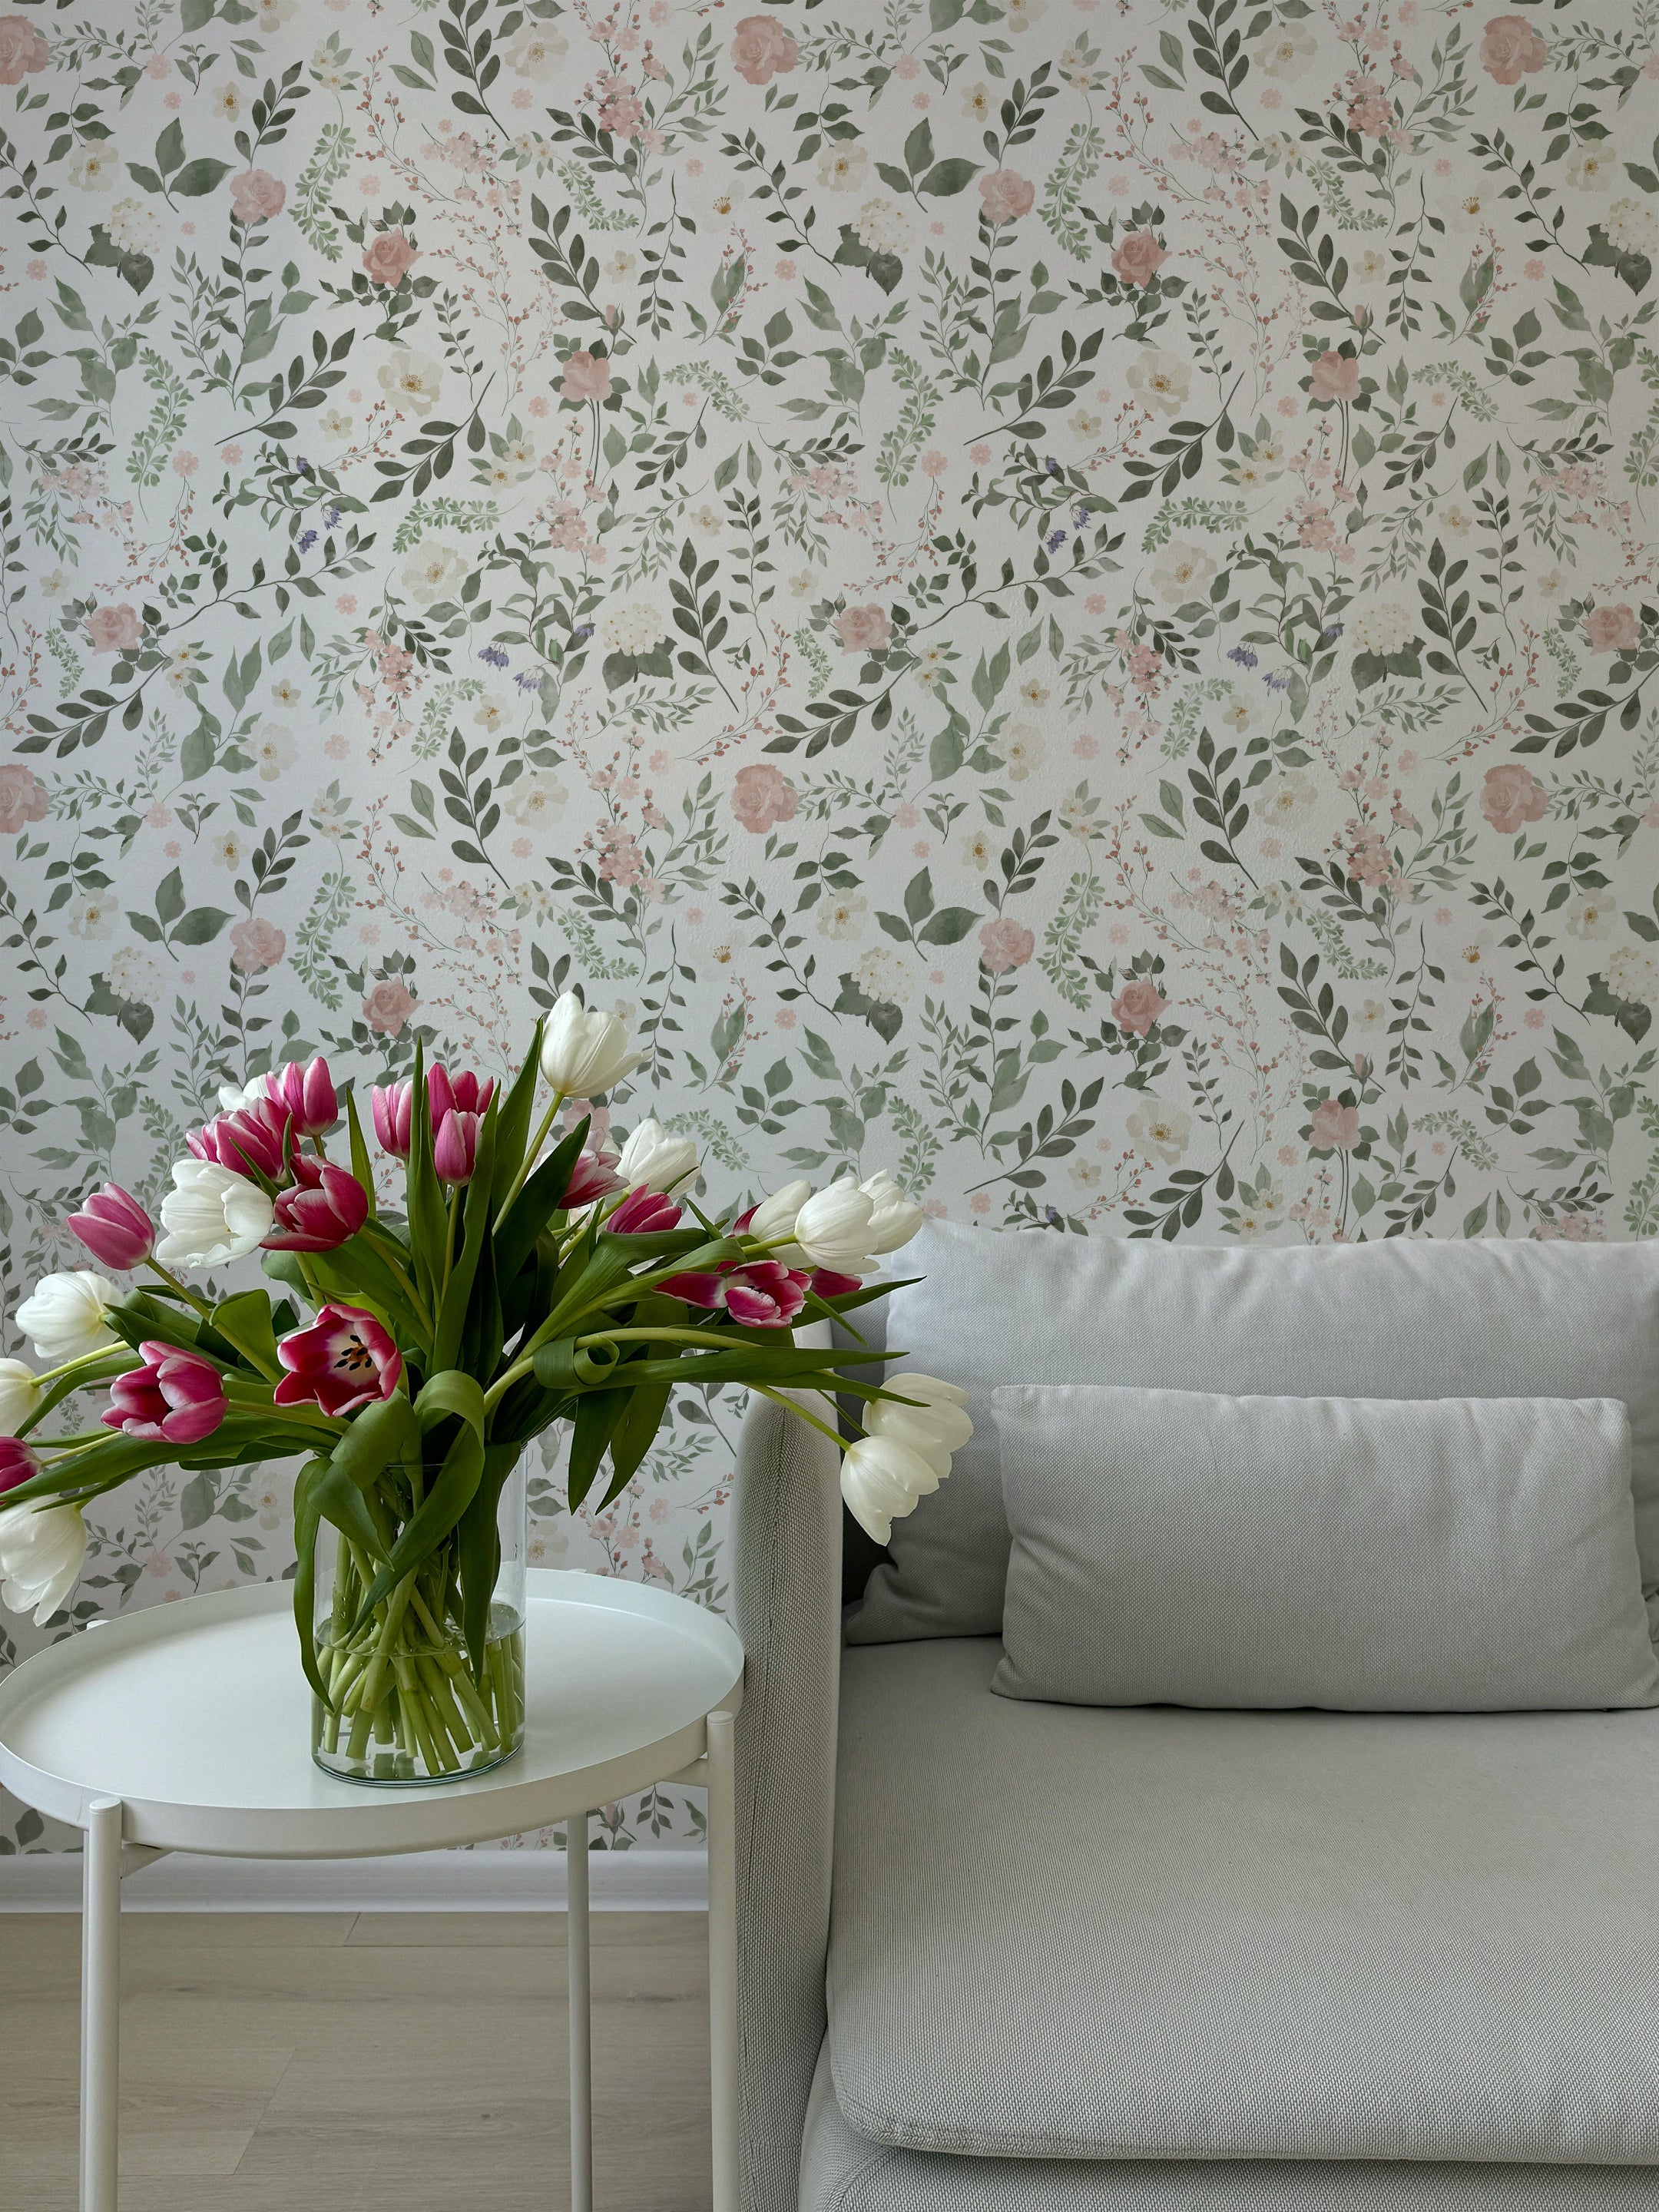 A modern living room with a light gray sofa and a vase of tulips on a side table, set against a wall decorated with Enchanted Symphony Wallpaper. The wallpaper displays a subtle and graceful floral design with green foliage and pink blooms.